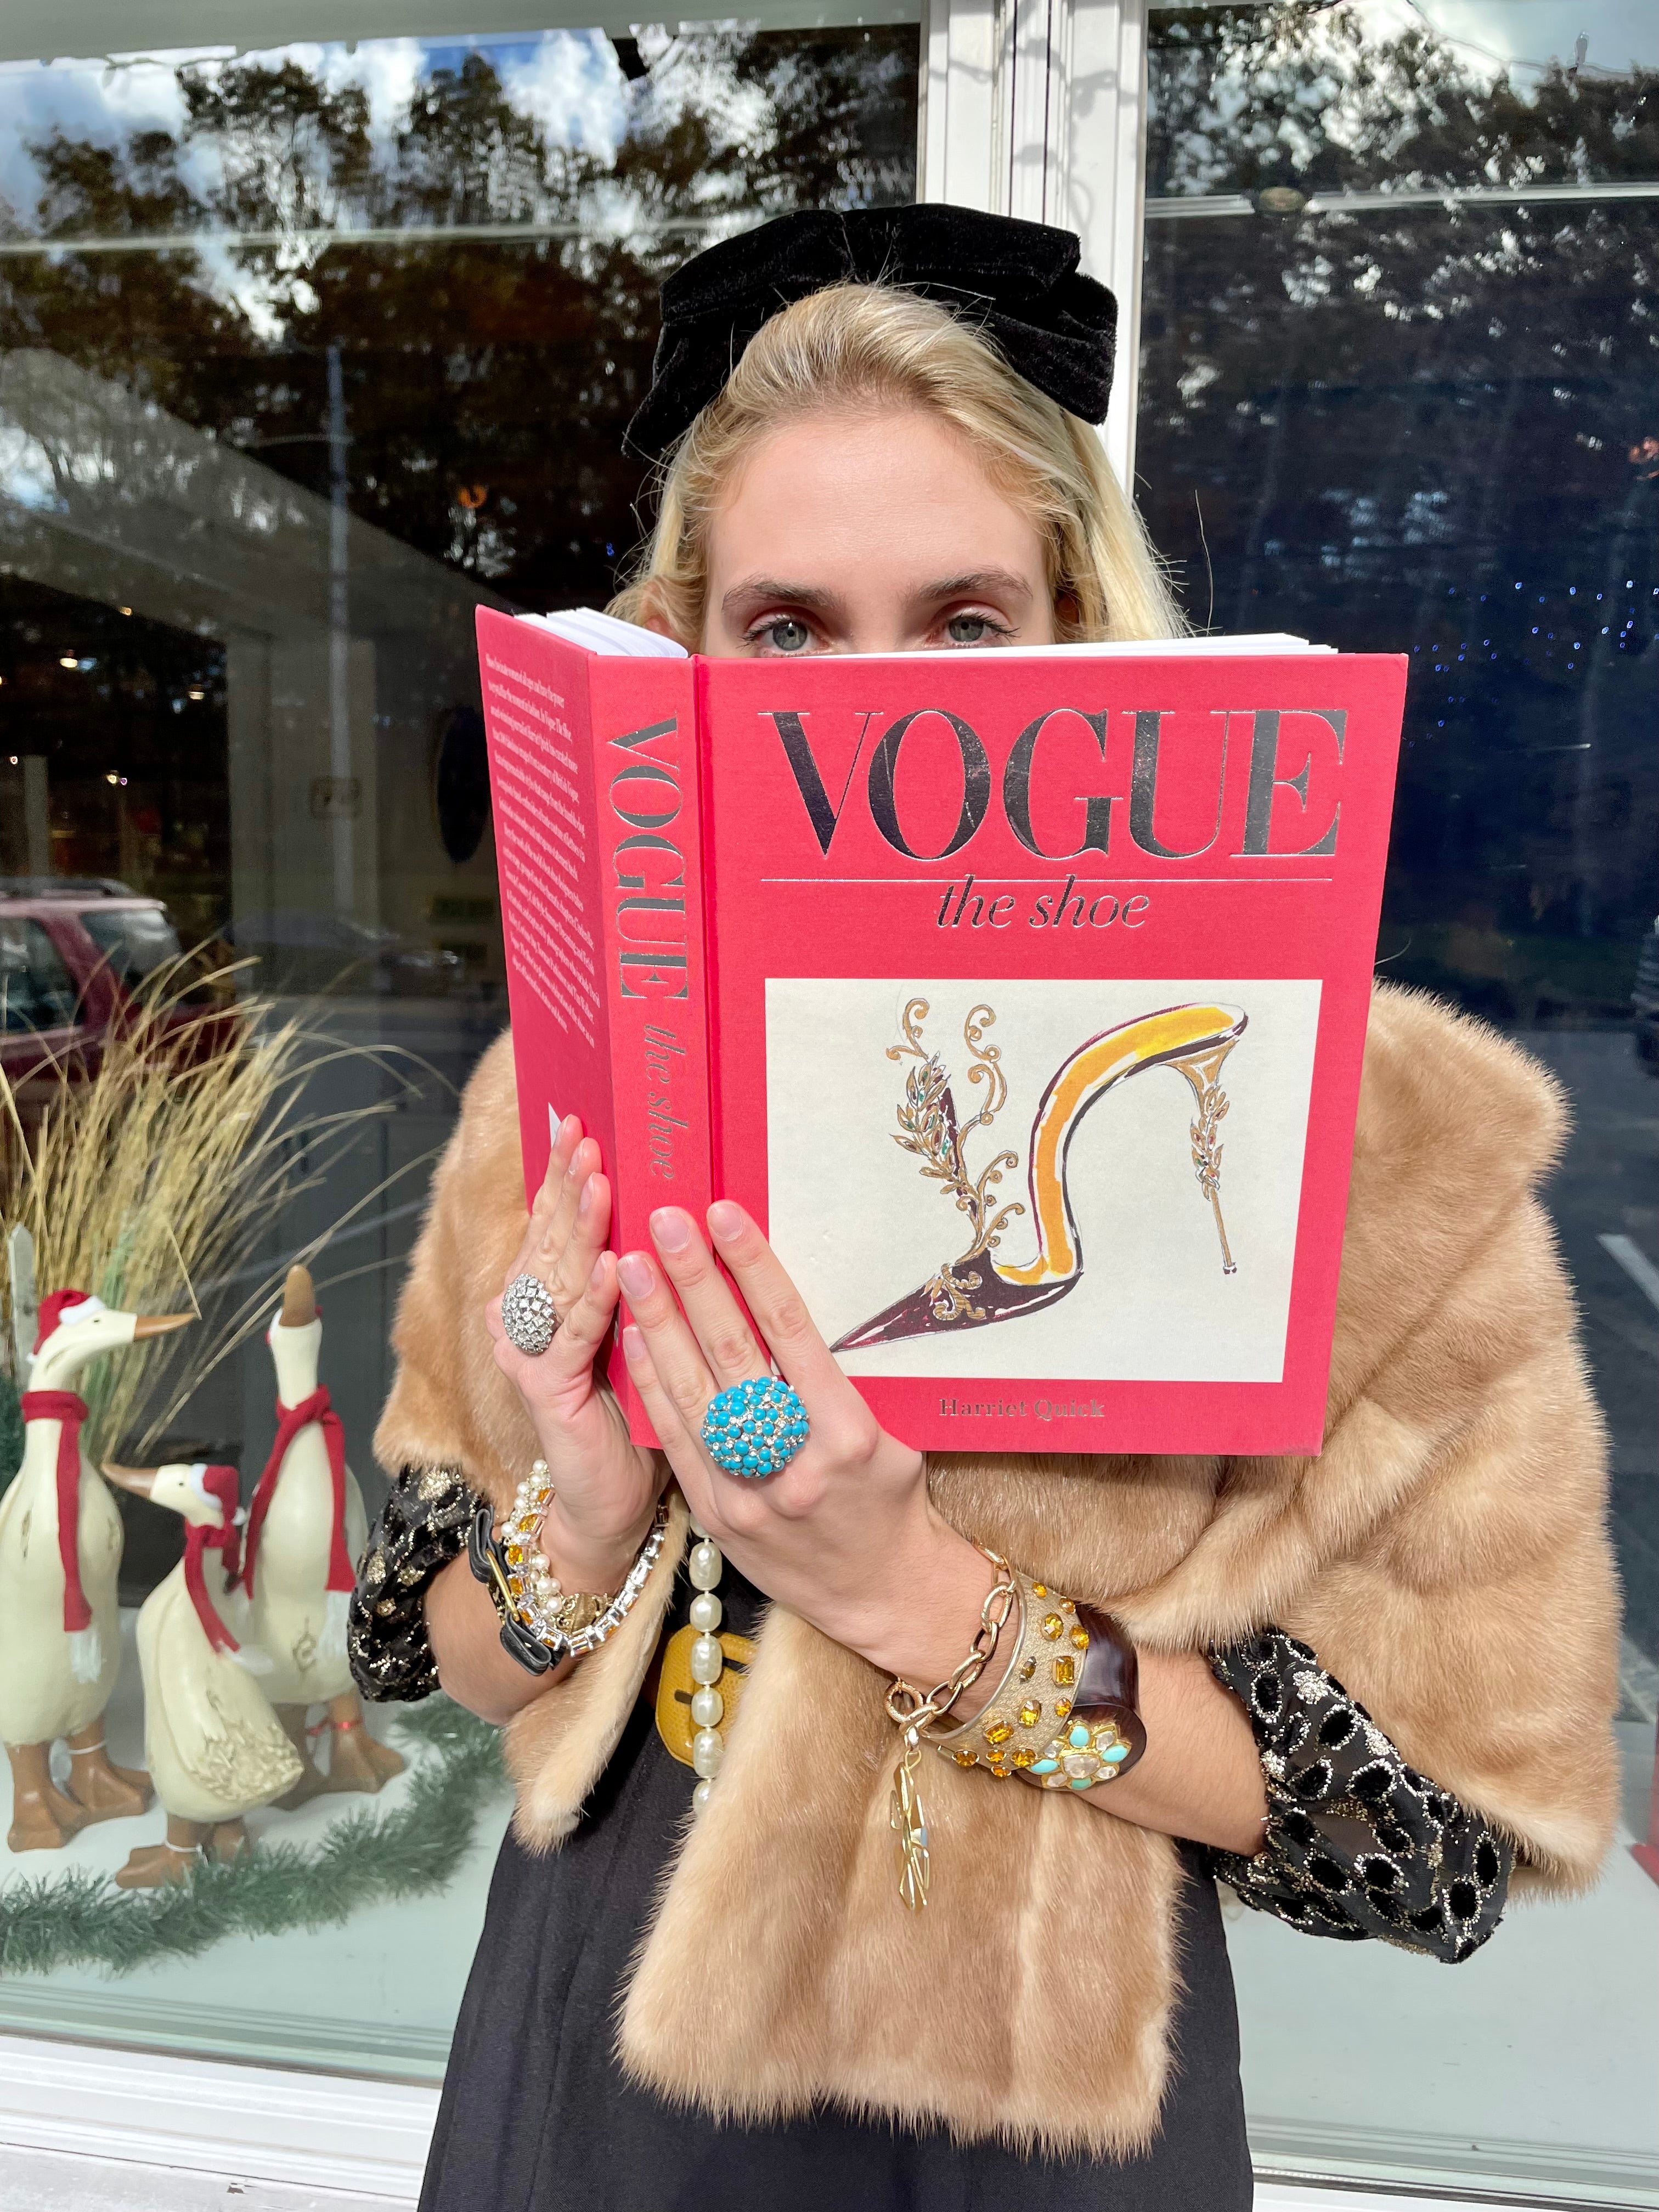 Vogue, and Window shopping...